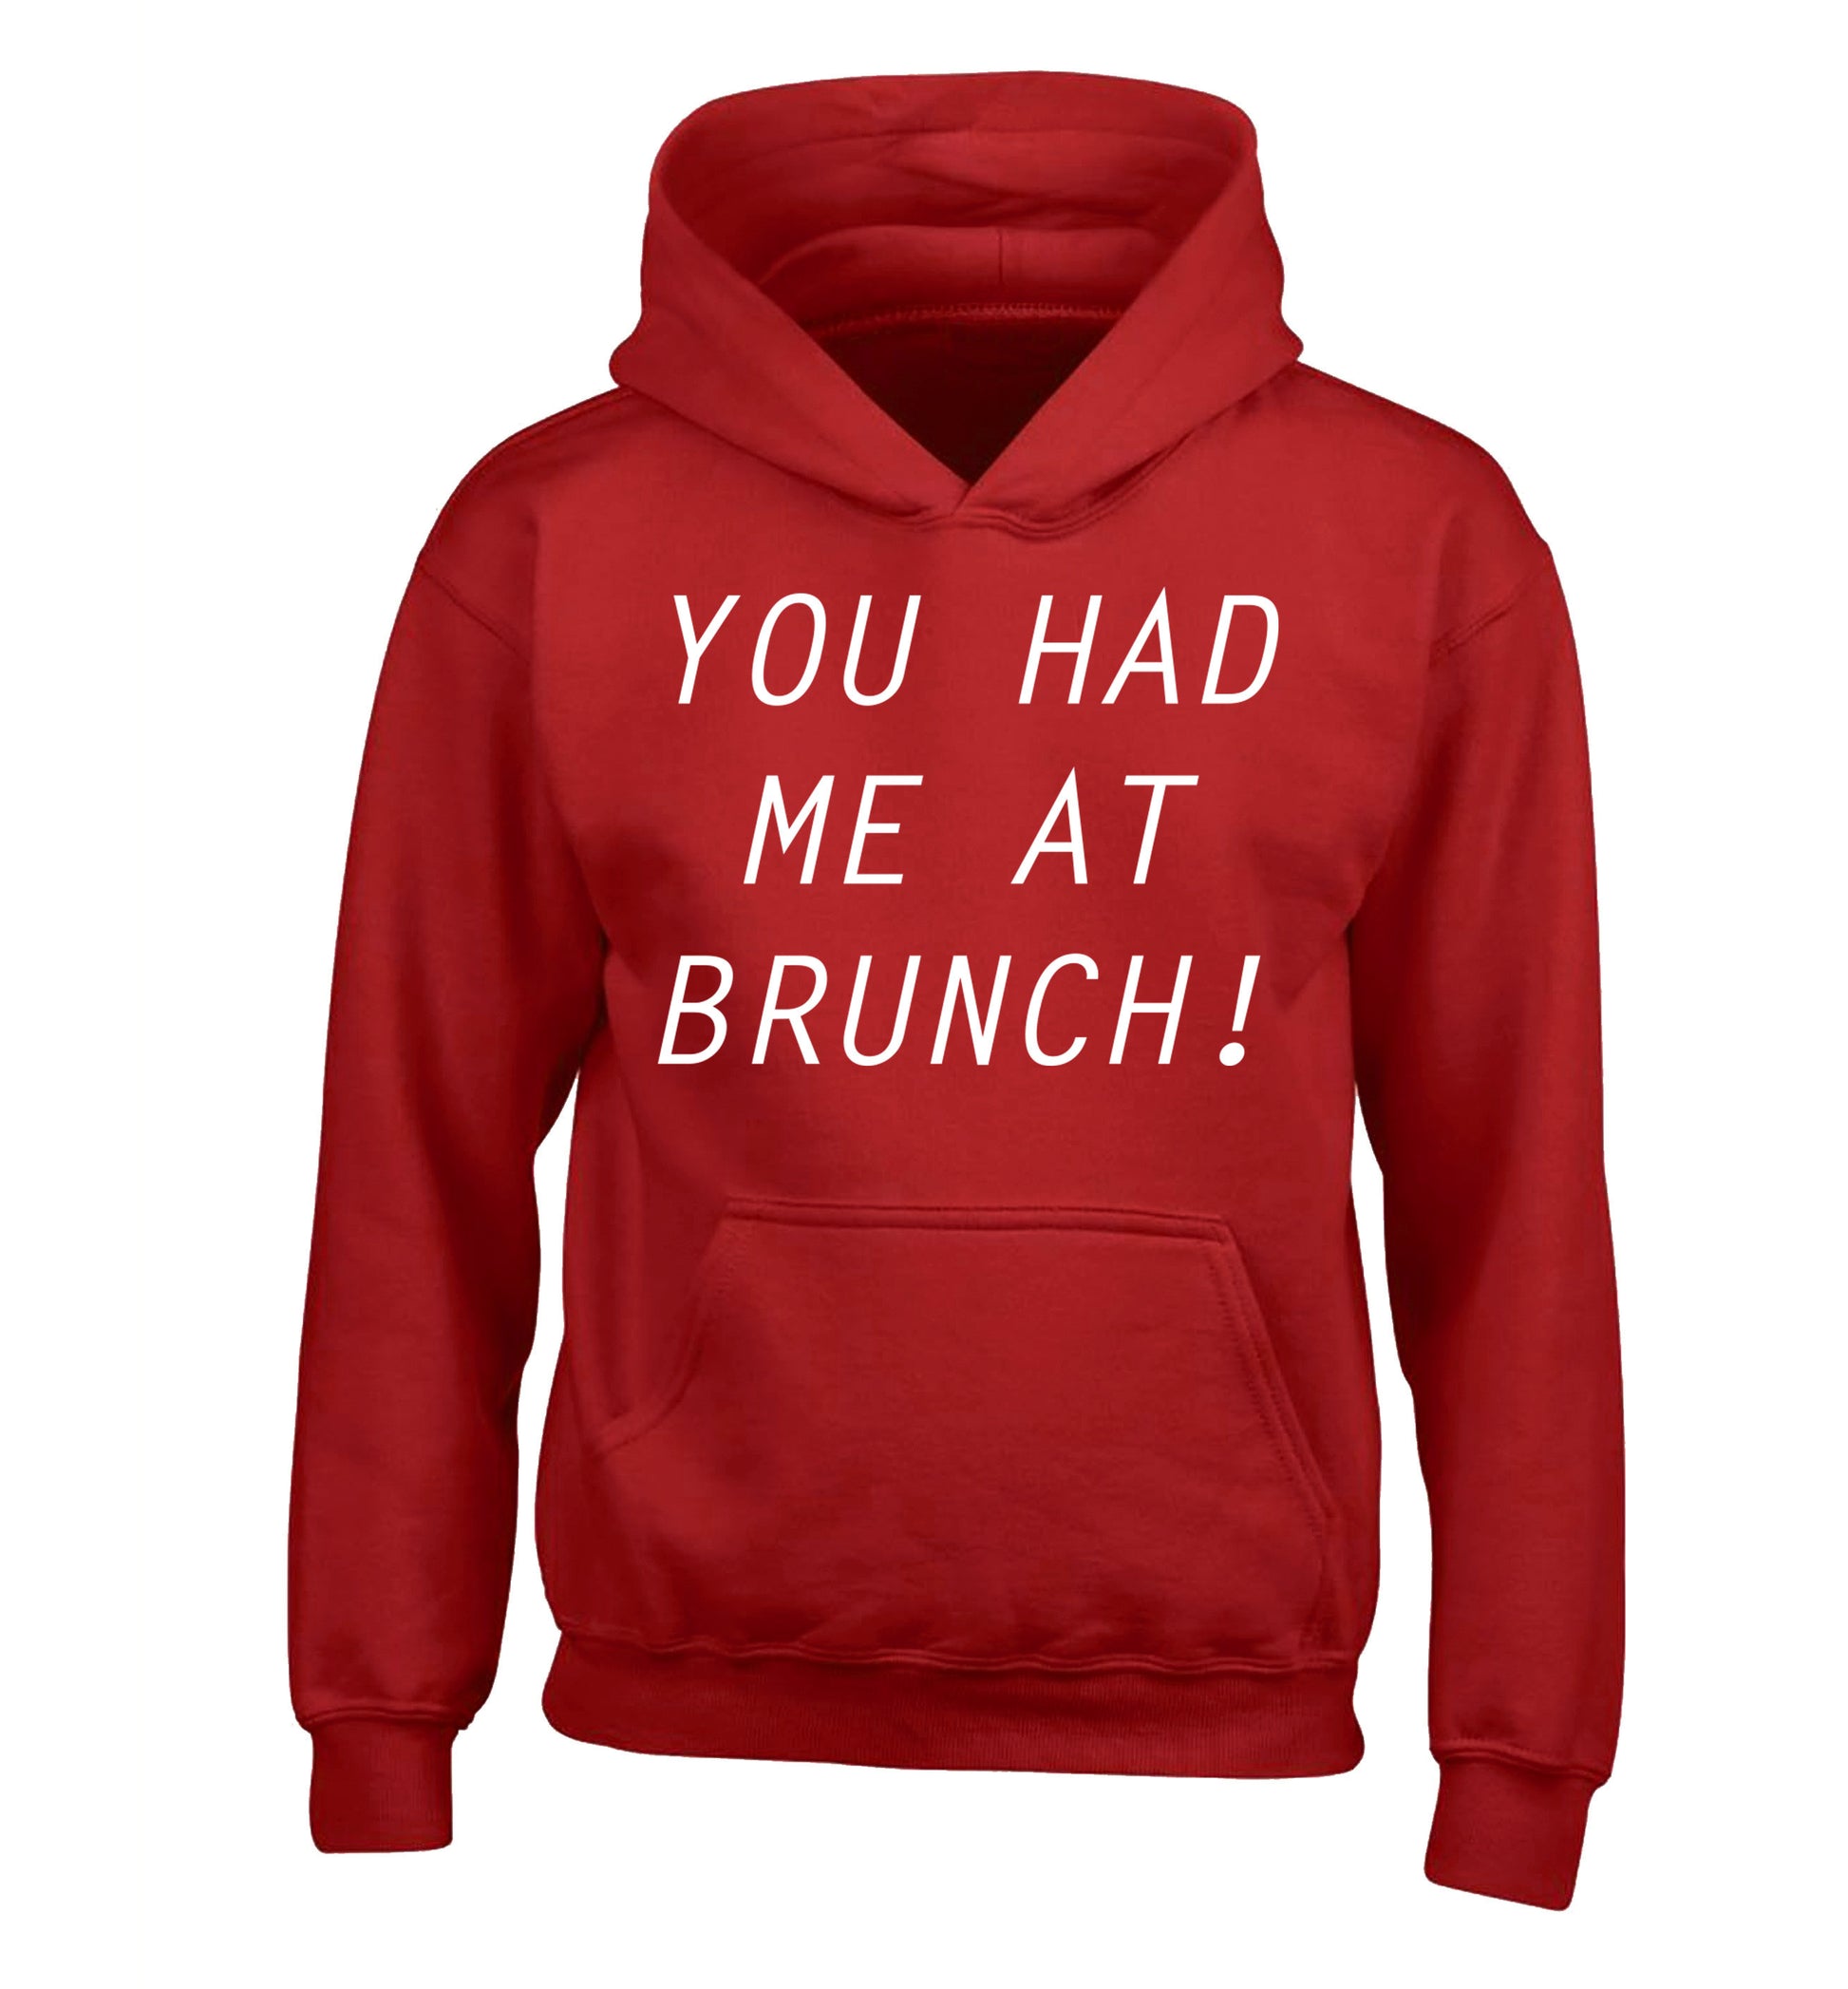 You had me at brunch children's blue sweater 12-14 Years